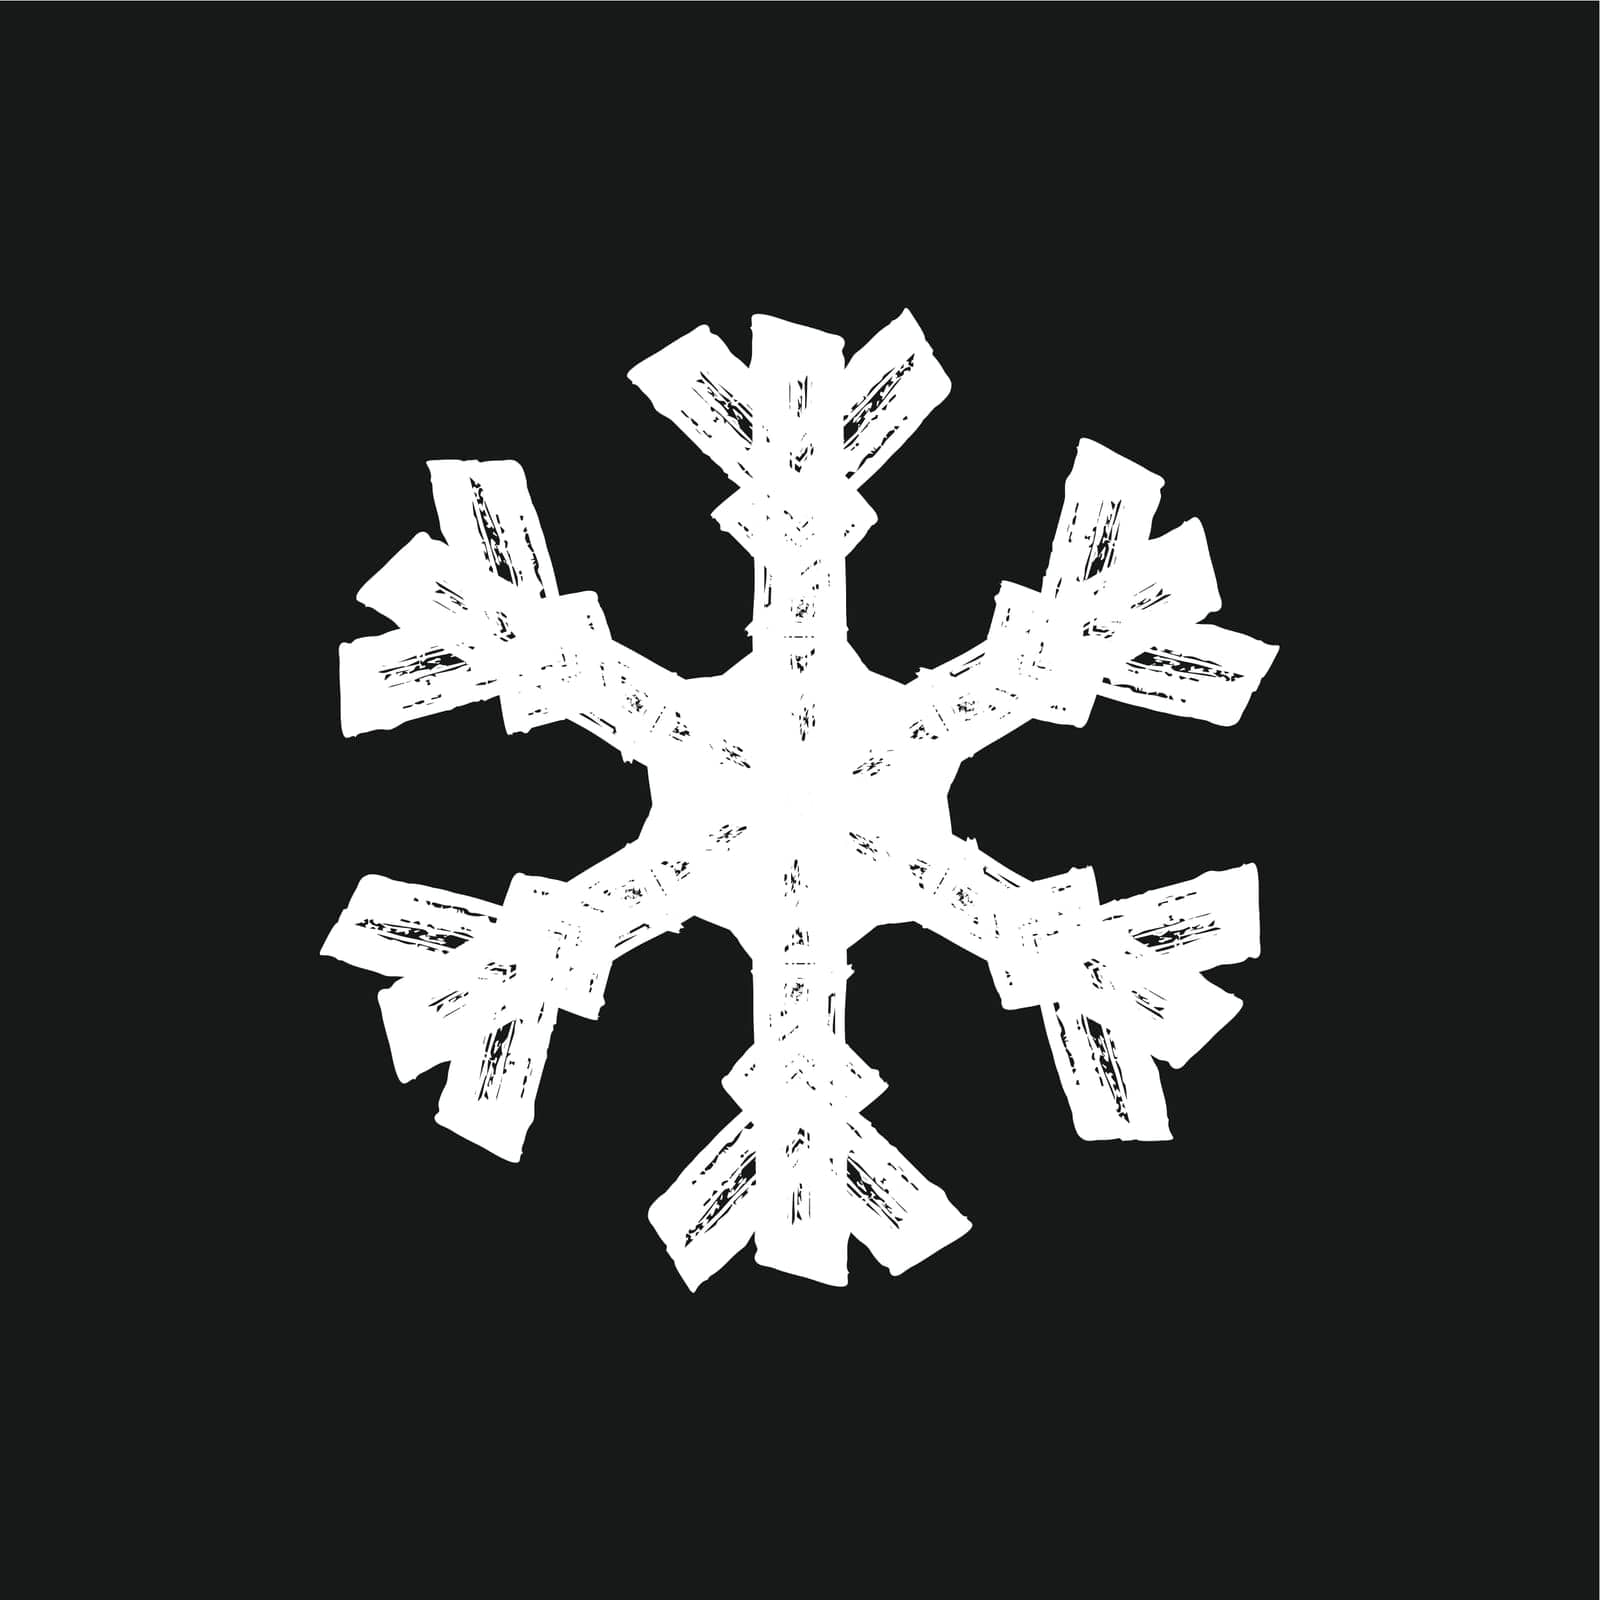 Grunge isolated snow flake. Distress marker painted snowflake shape. Brushed grainy christmas design template. Icon, badge, label, certificate background. Artistic design element. EPS10 vector.